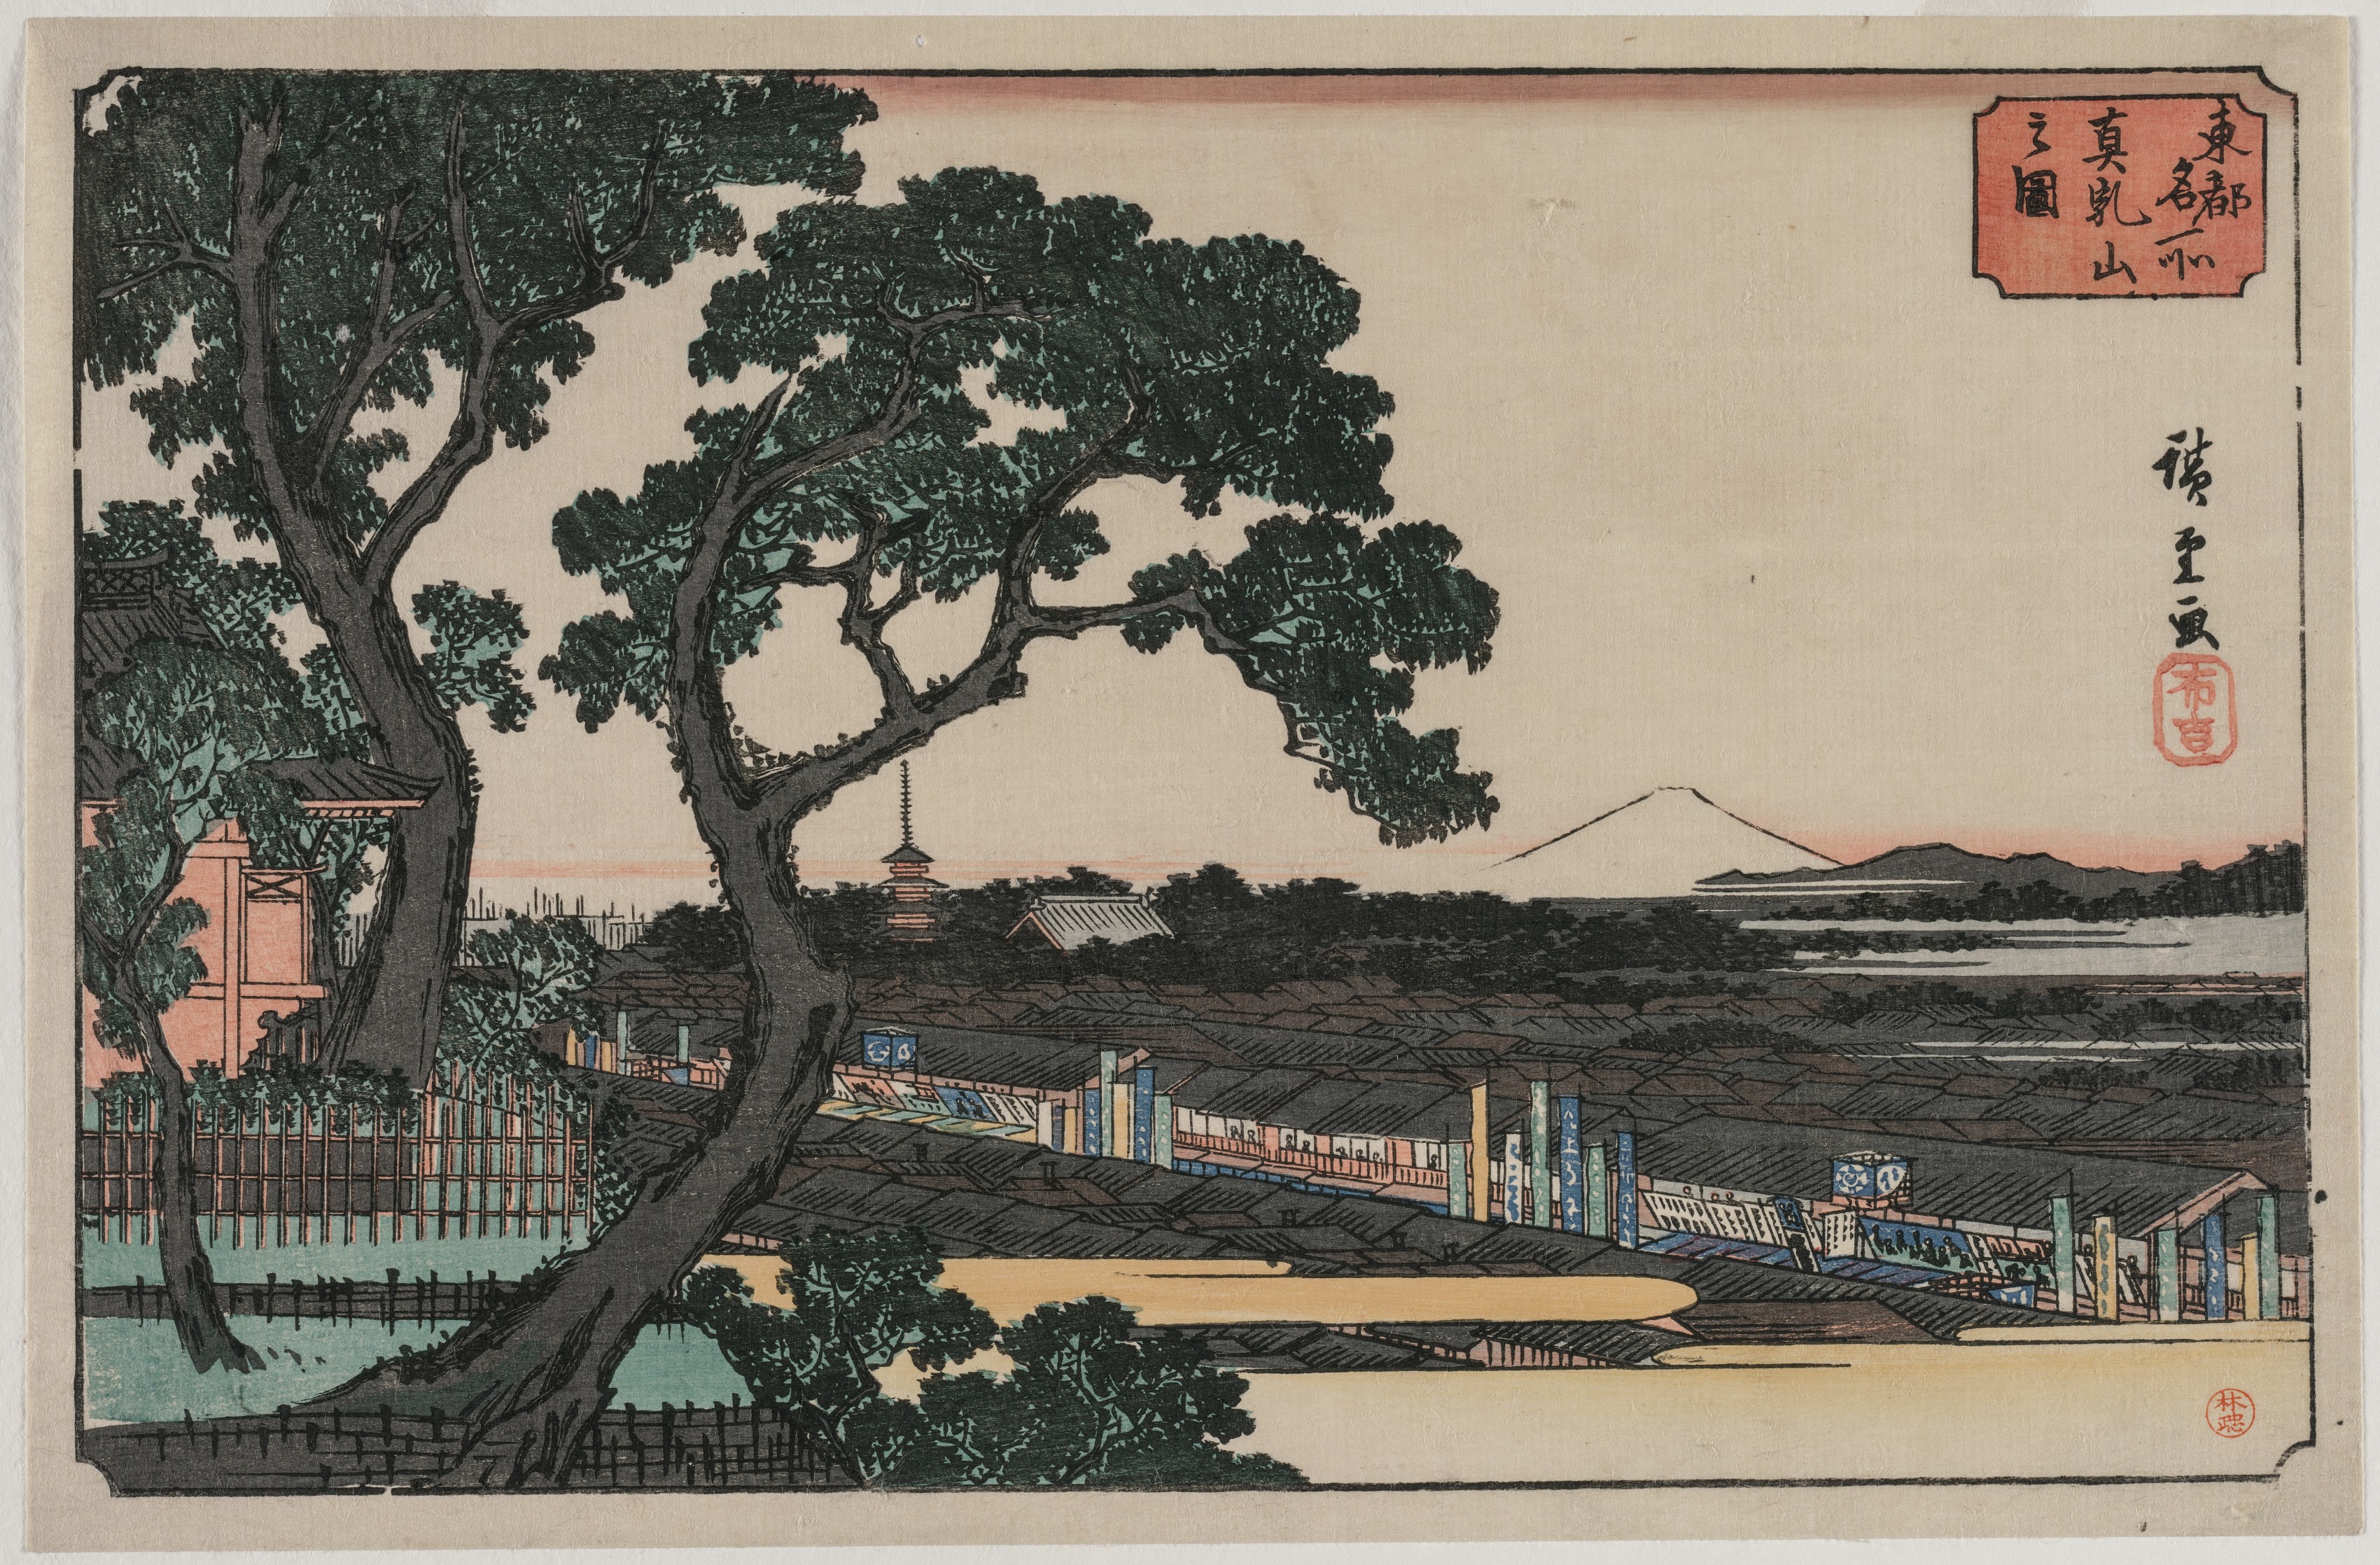 Picture of Matsuchiyama, from the series Famous Places in the Eastern Capital